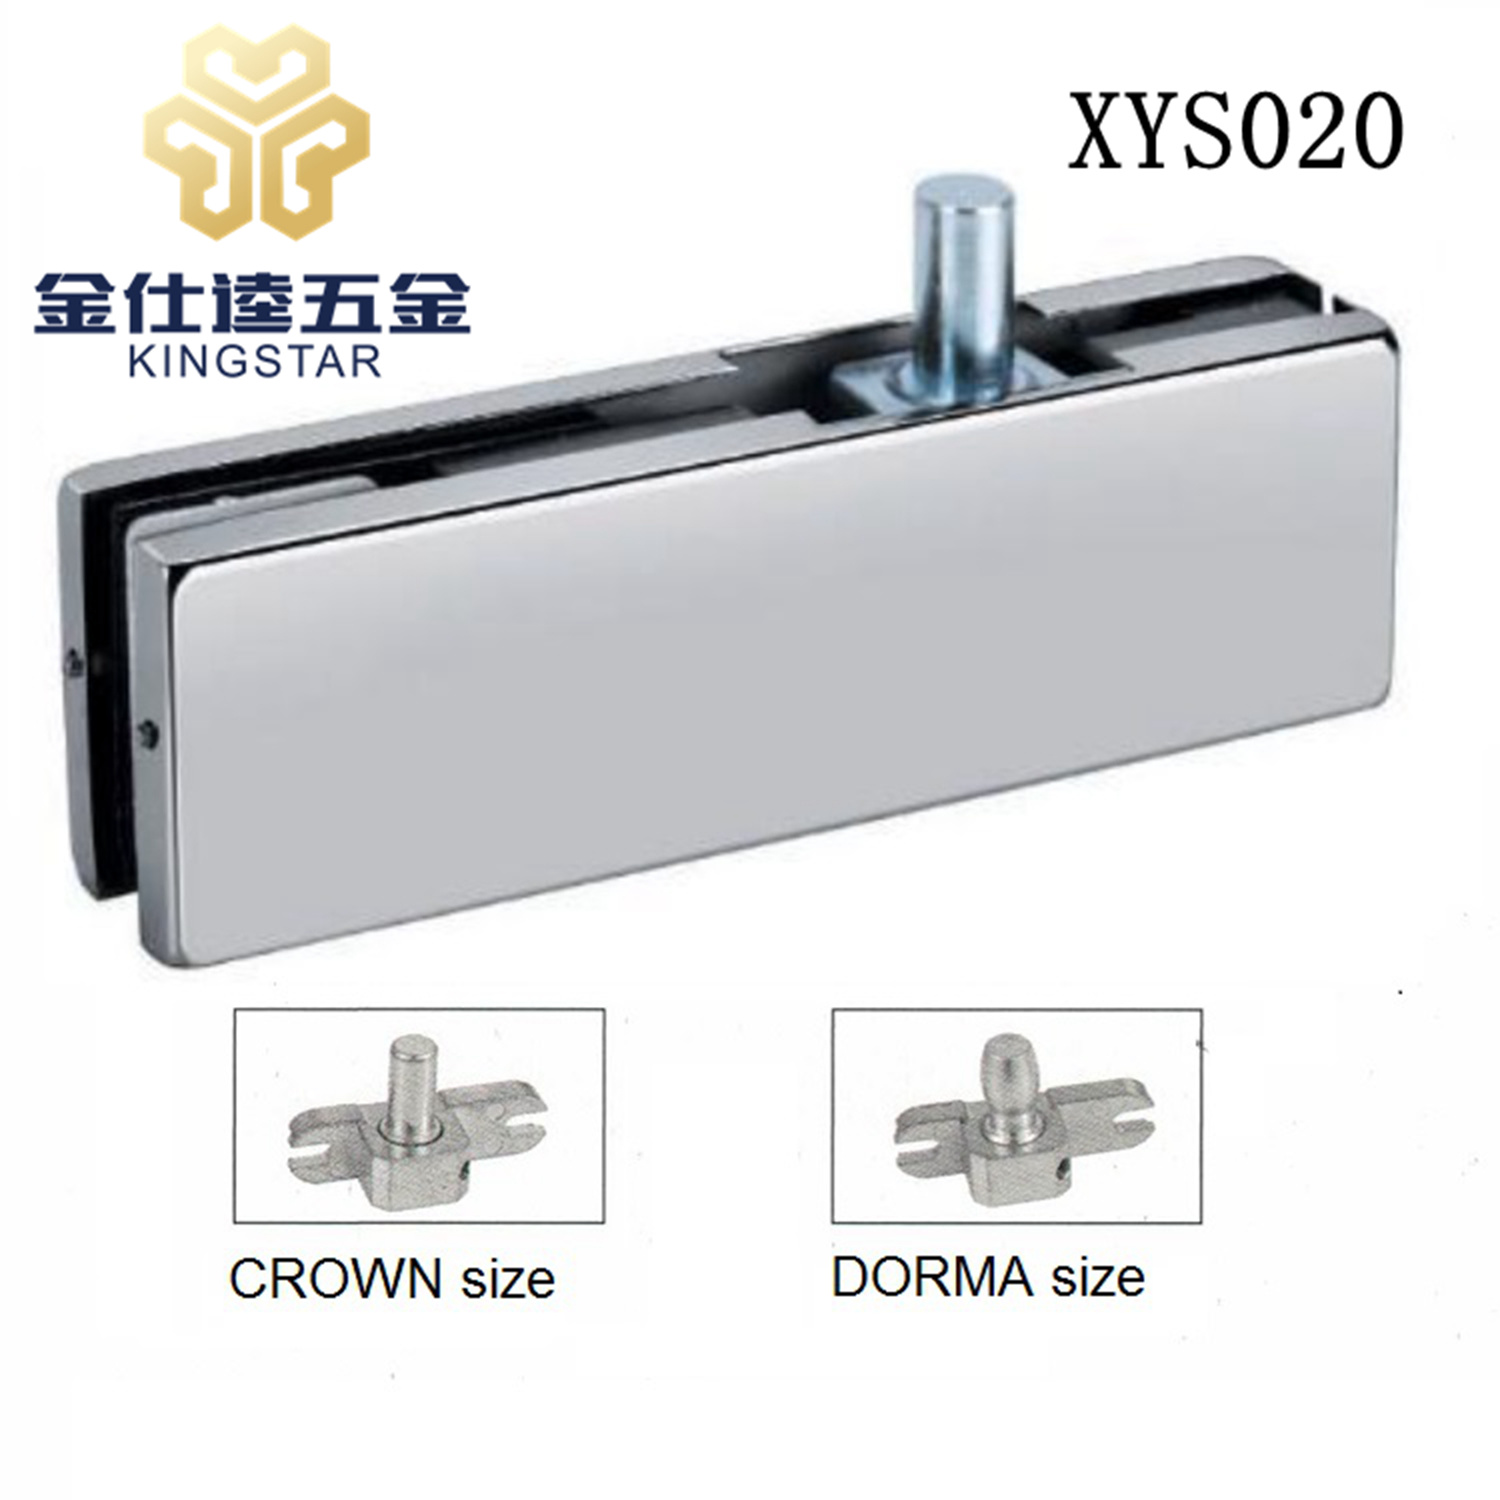 XYS020 Top Corner Patch Fitting Glass Clamp for Frameless Glass Door